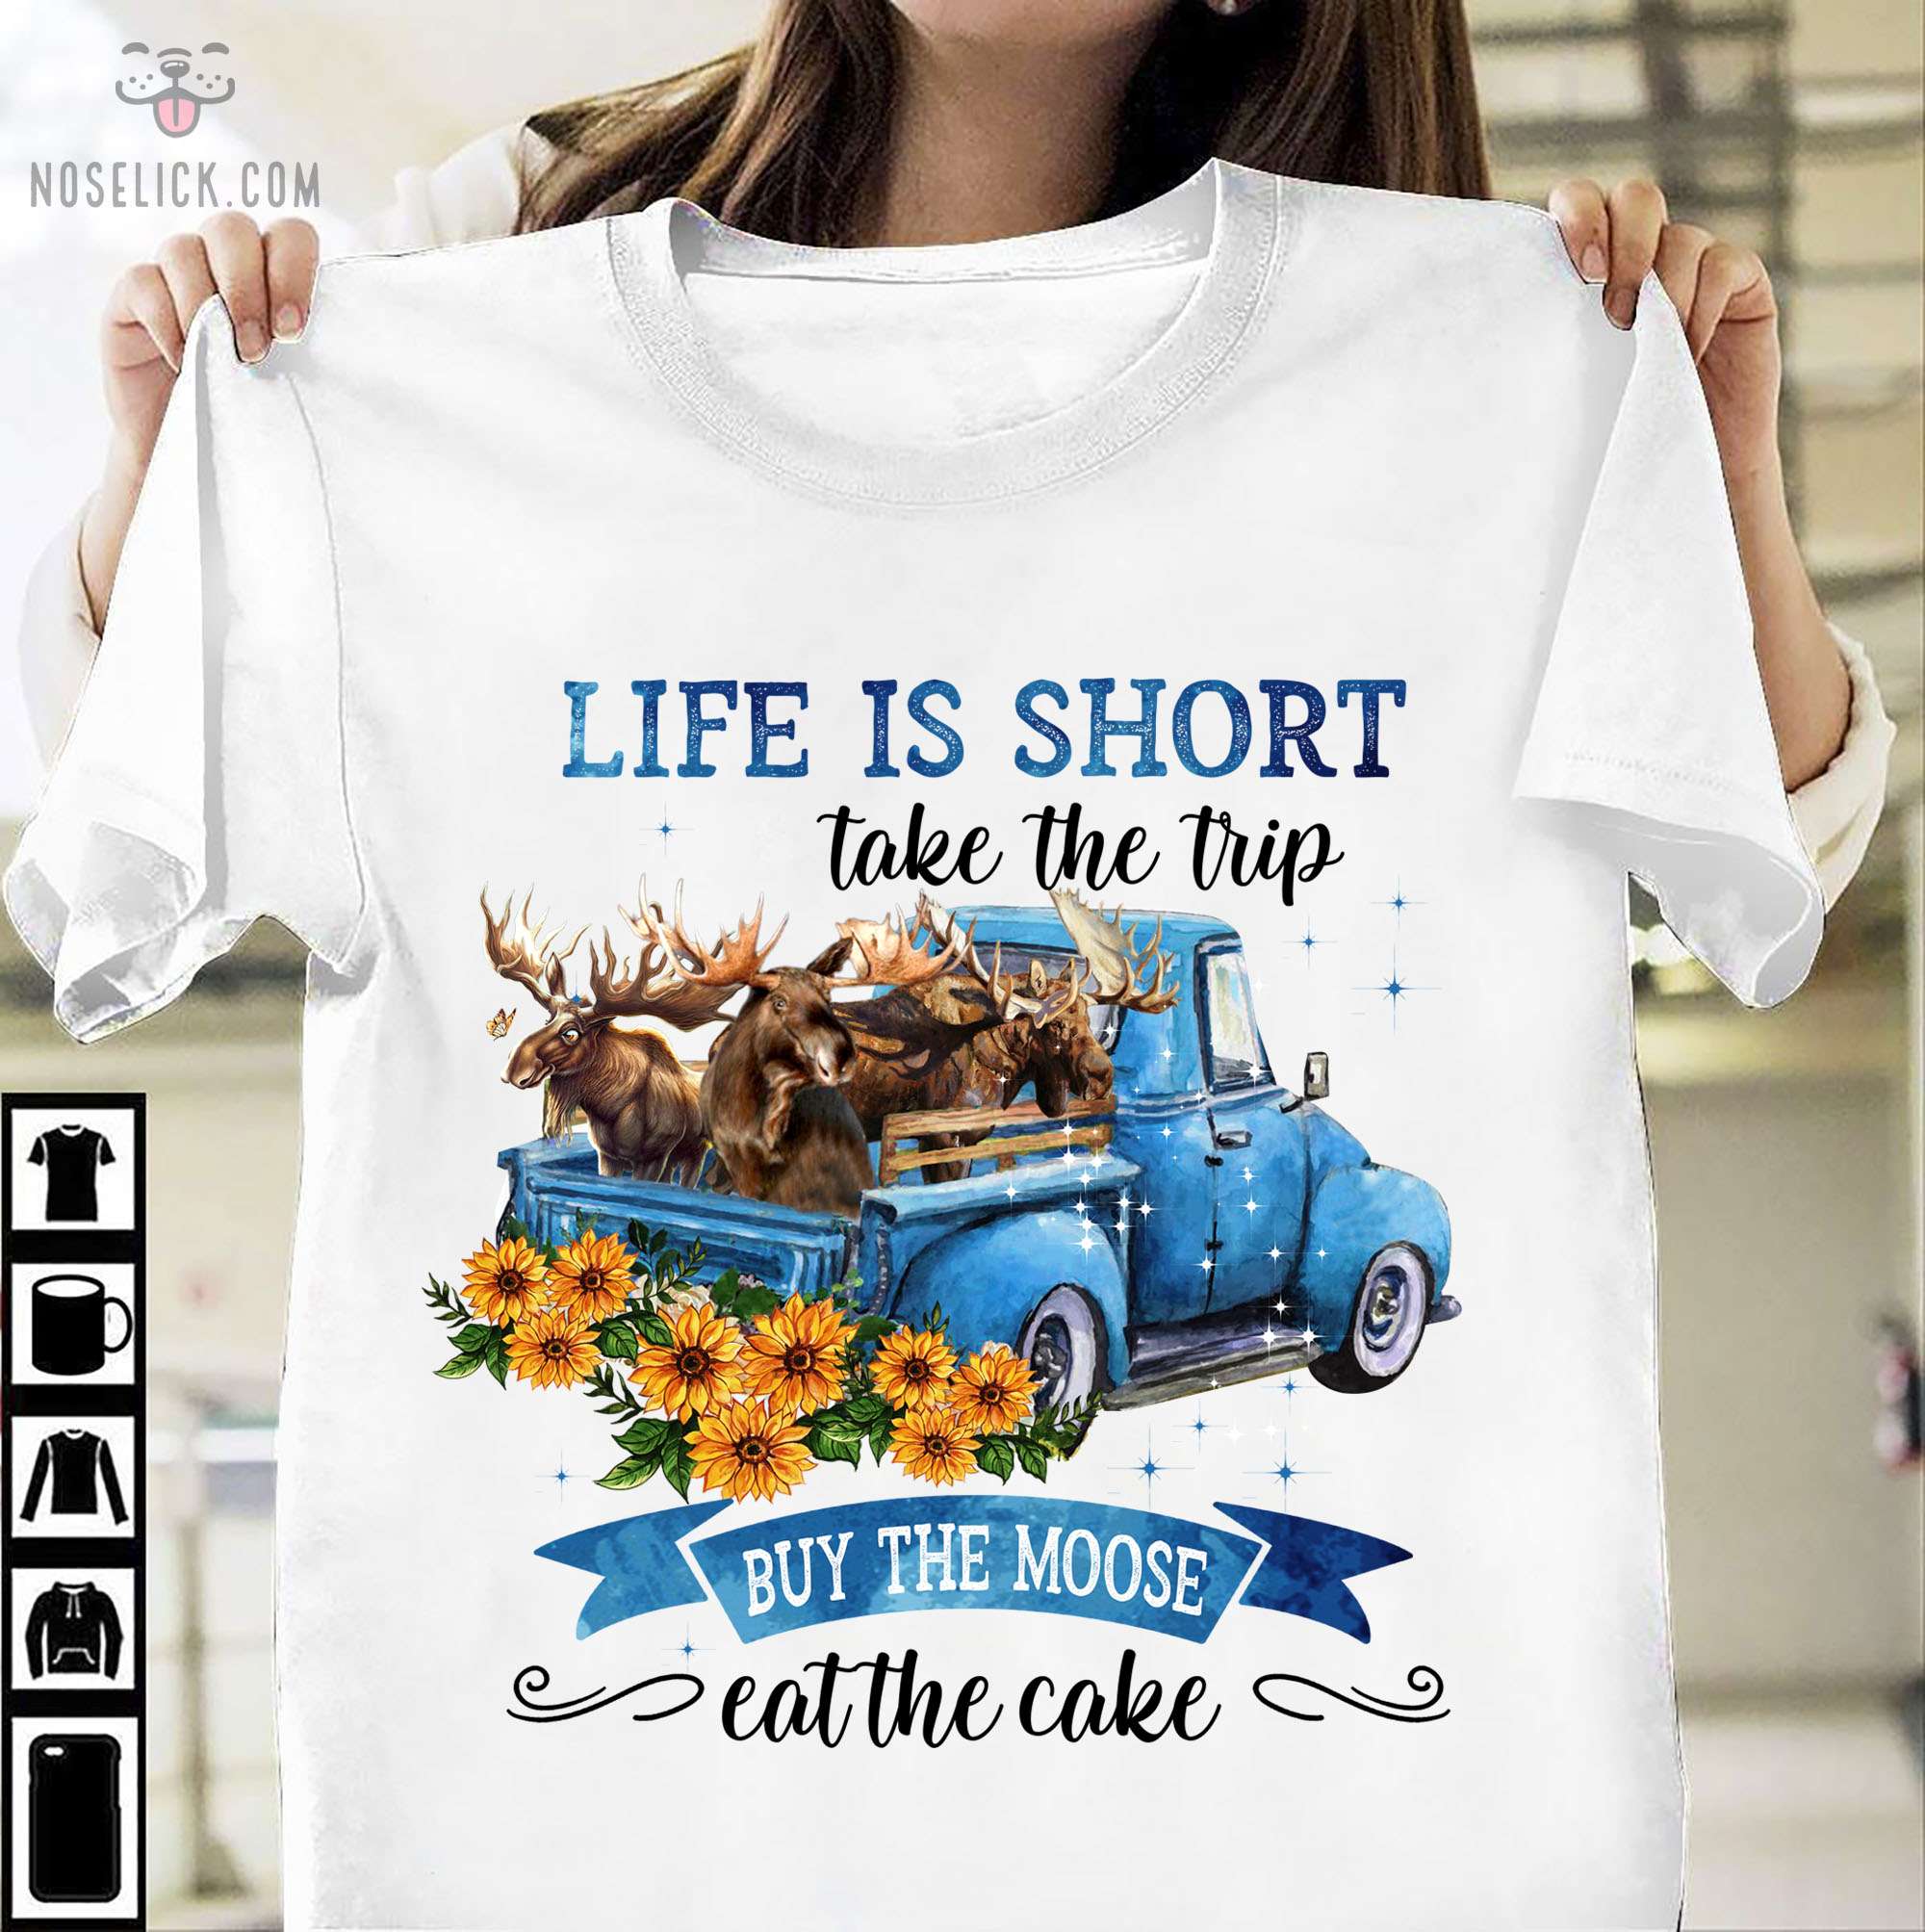 Life is short take the trip buy the moose eat the cake - Moose on truck